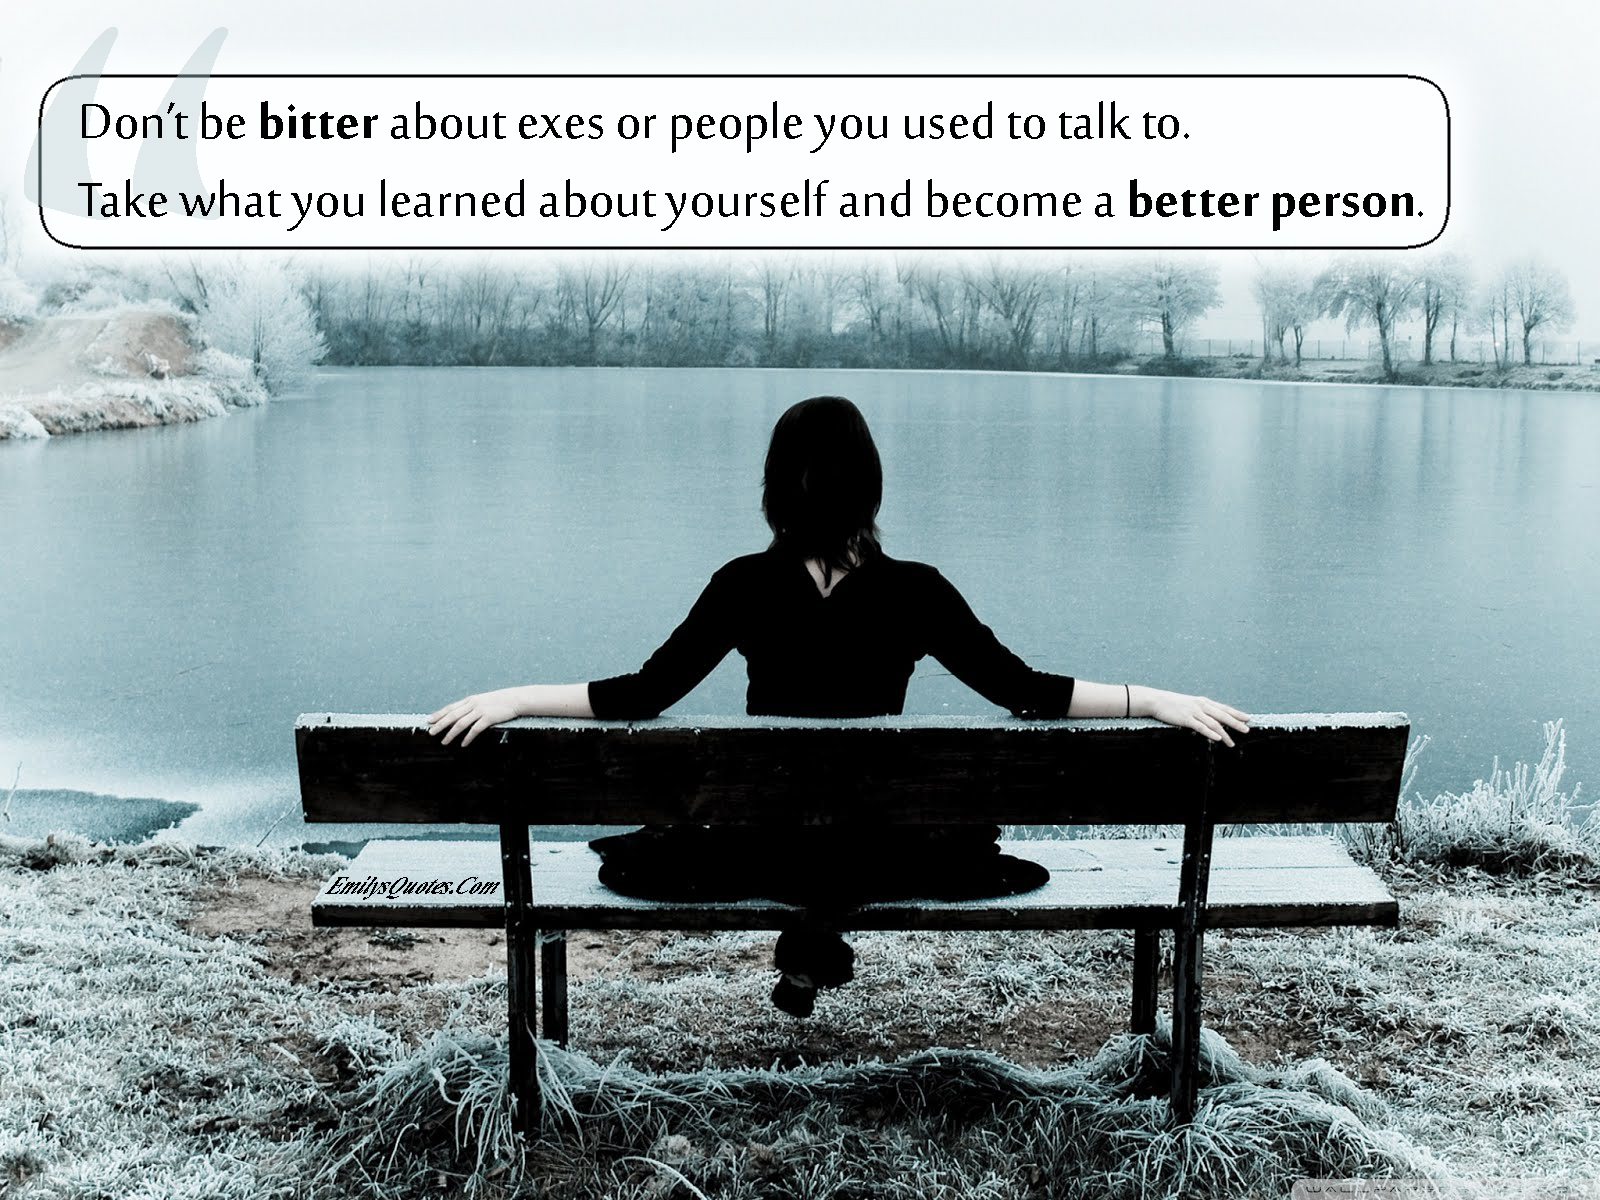 Don’t be bitter about exes or people you used to talk to. Take what you learned about yourself and become a better person